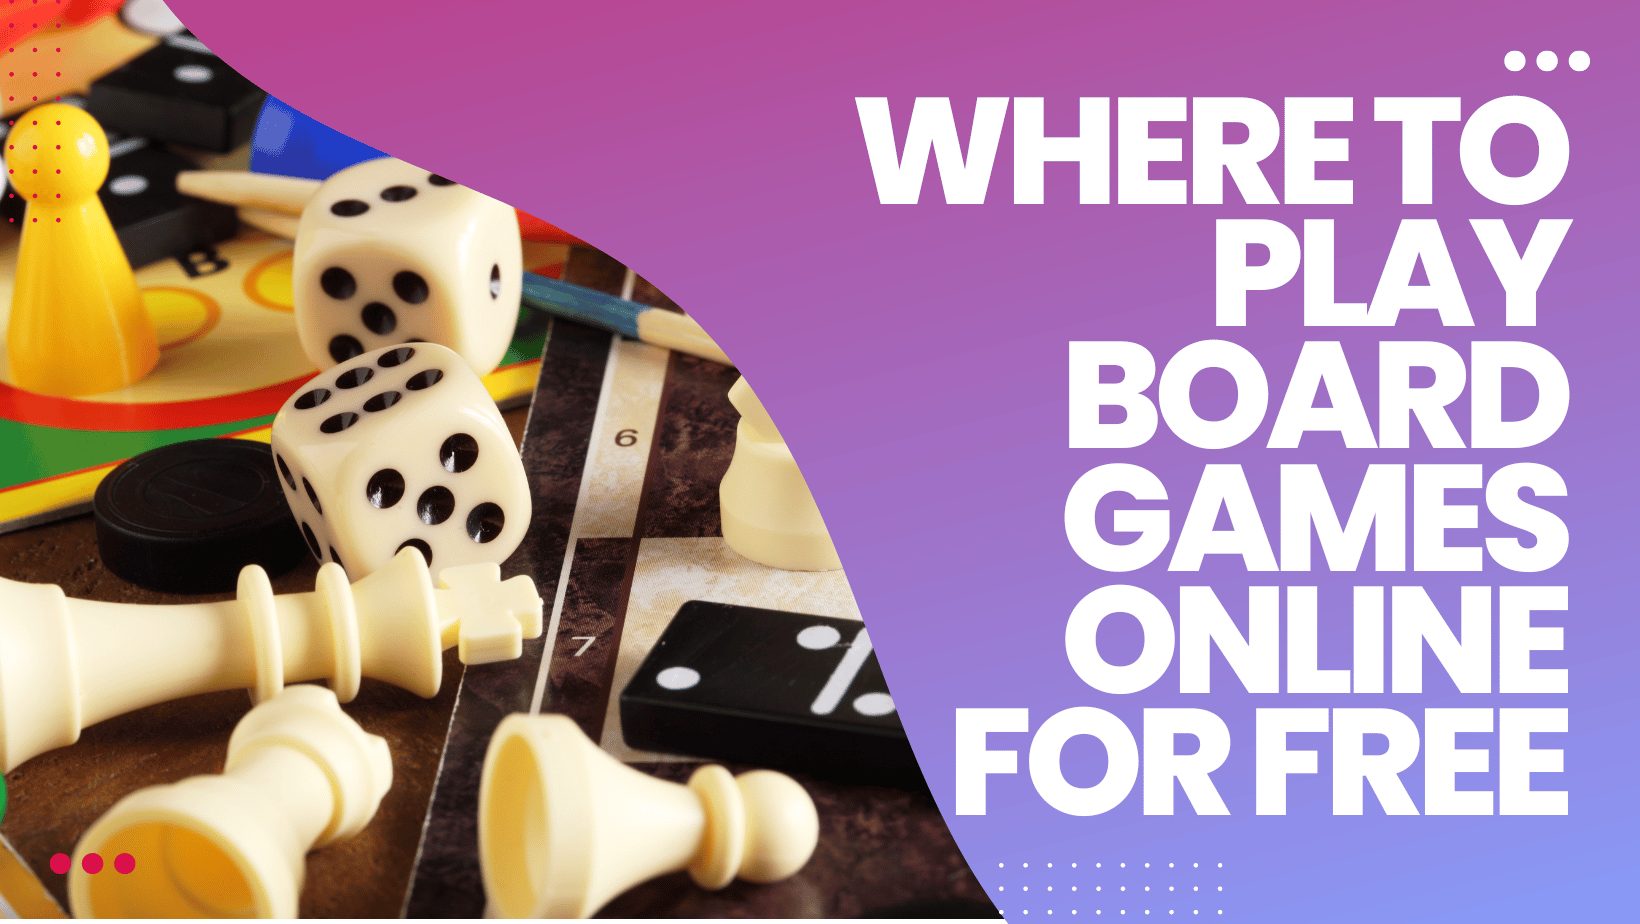 Where can you play board games online free?